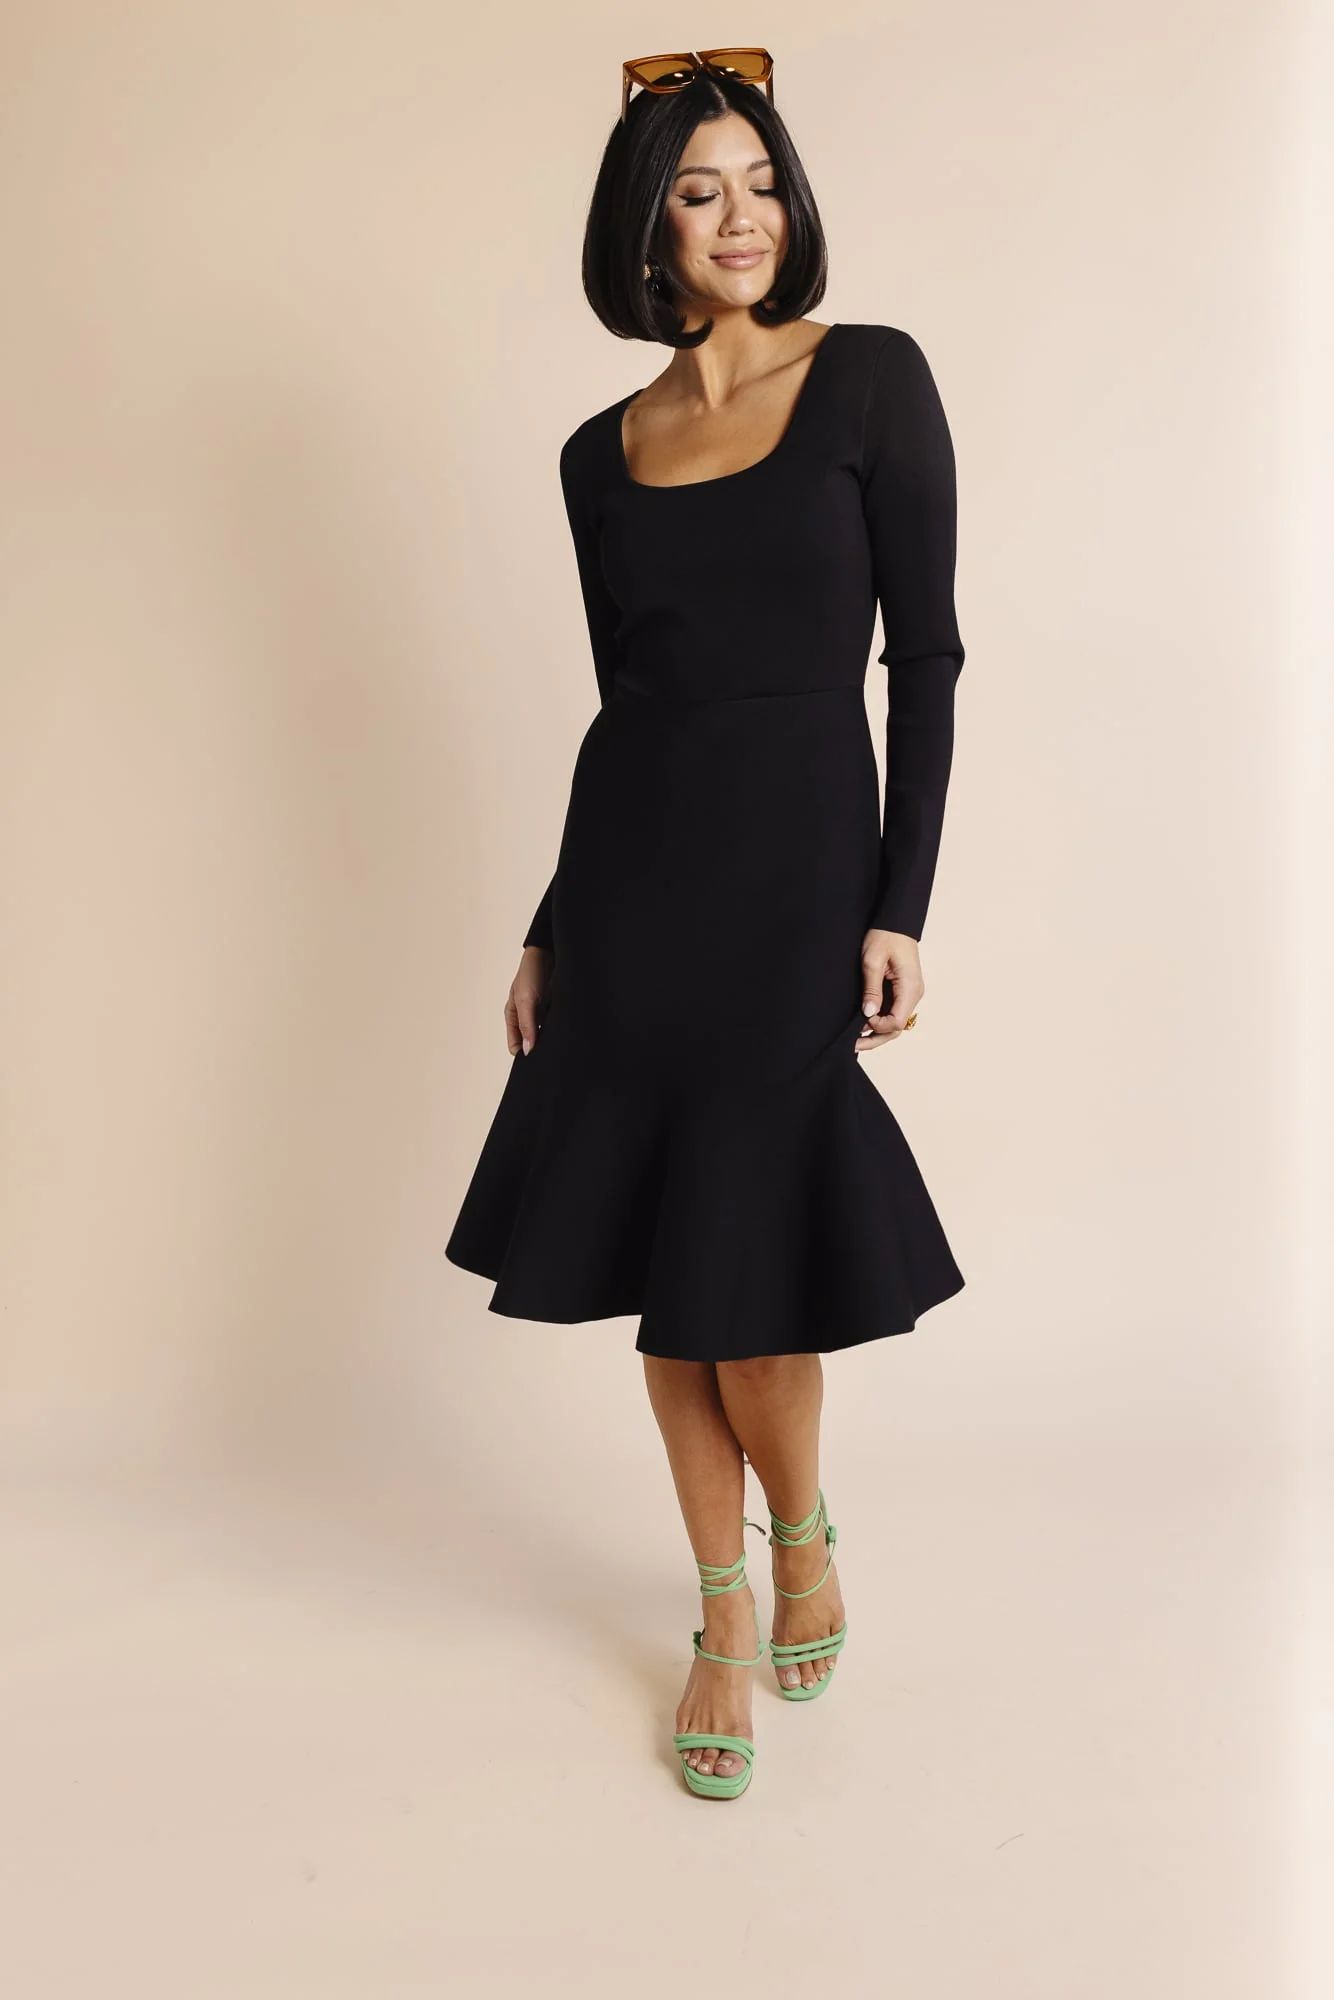 Stretch Knit Fit and Flare Dress - Black | Rachel Parcell